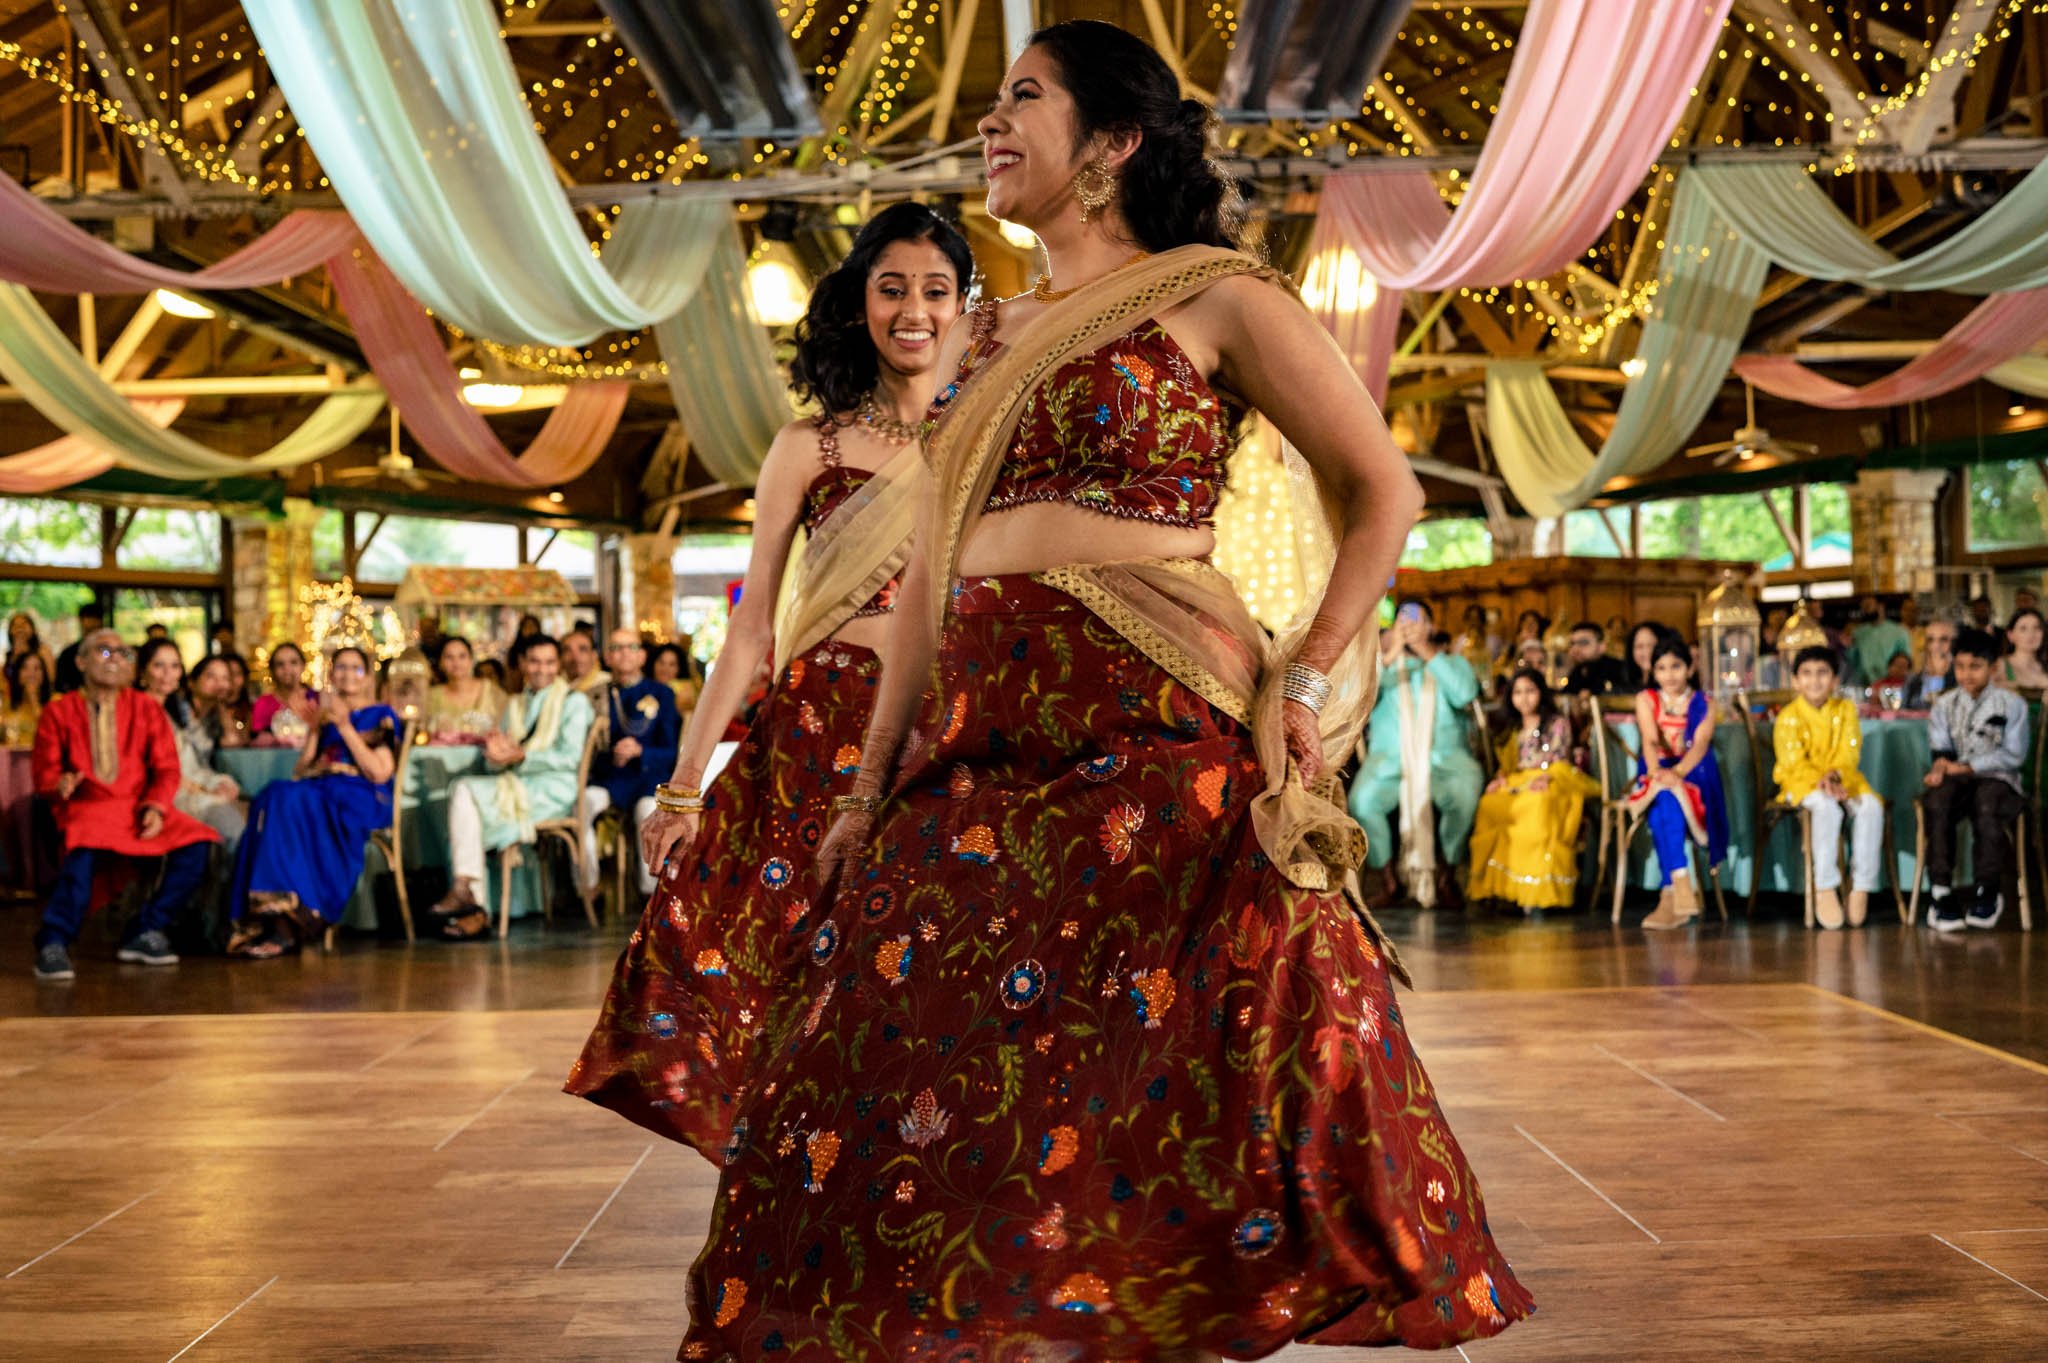 Two Indian women dancing on a stage at a Biltmore Estate wedding.